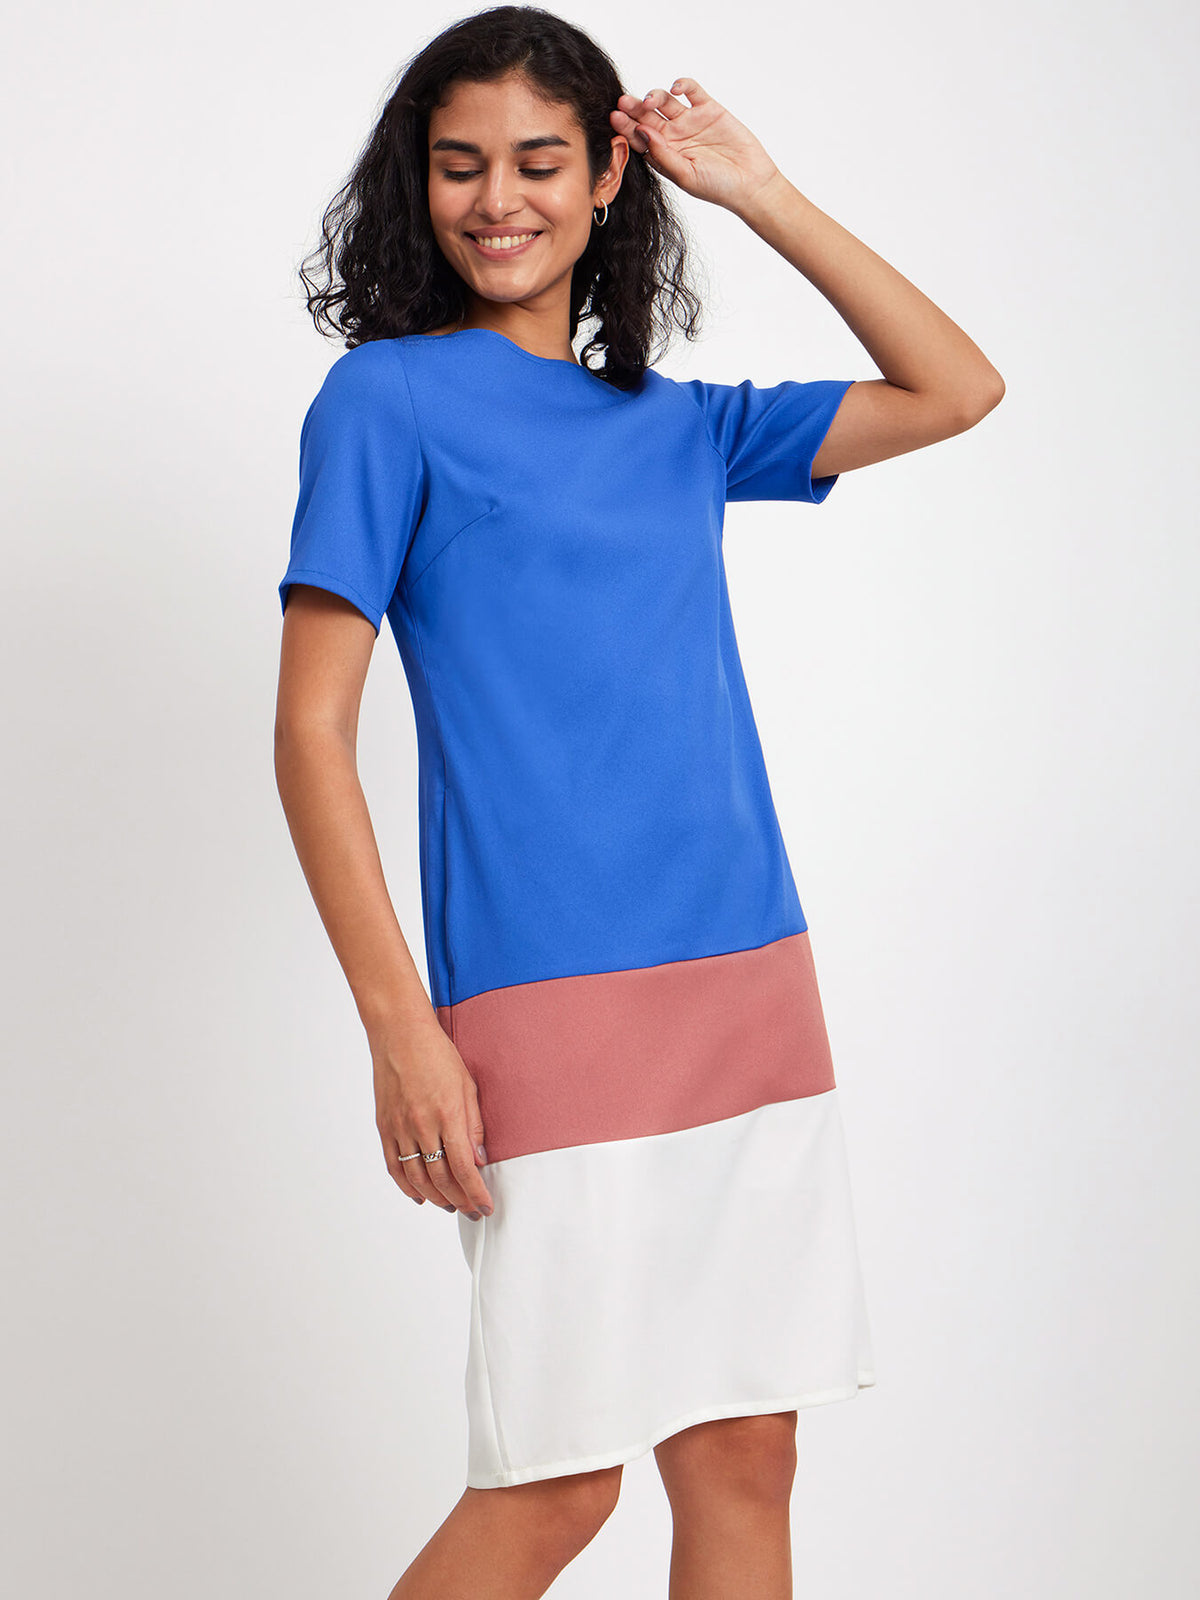 Colour Block Boat Neck Dress - Blue And White